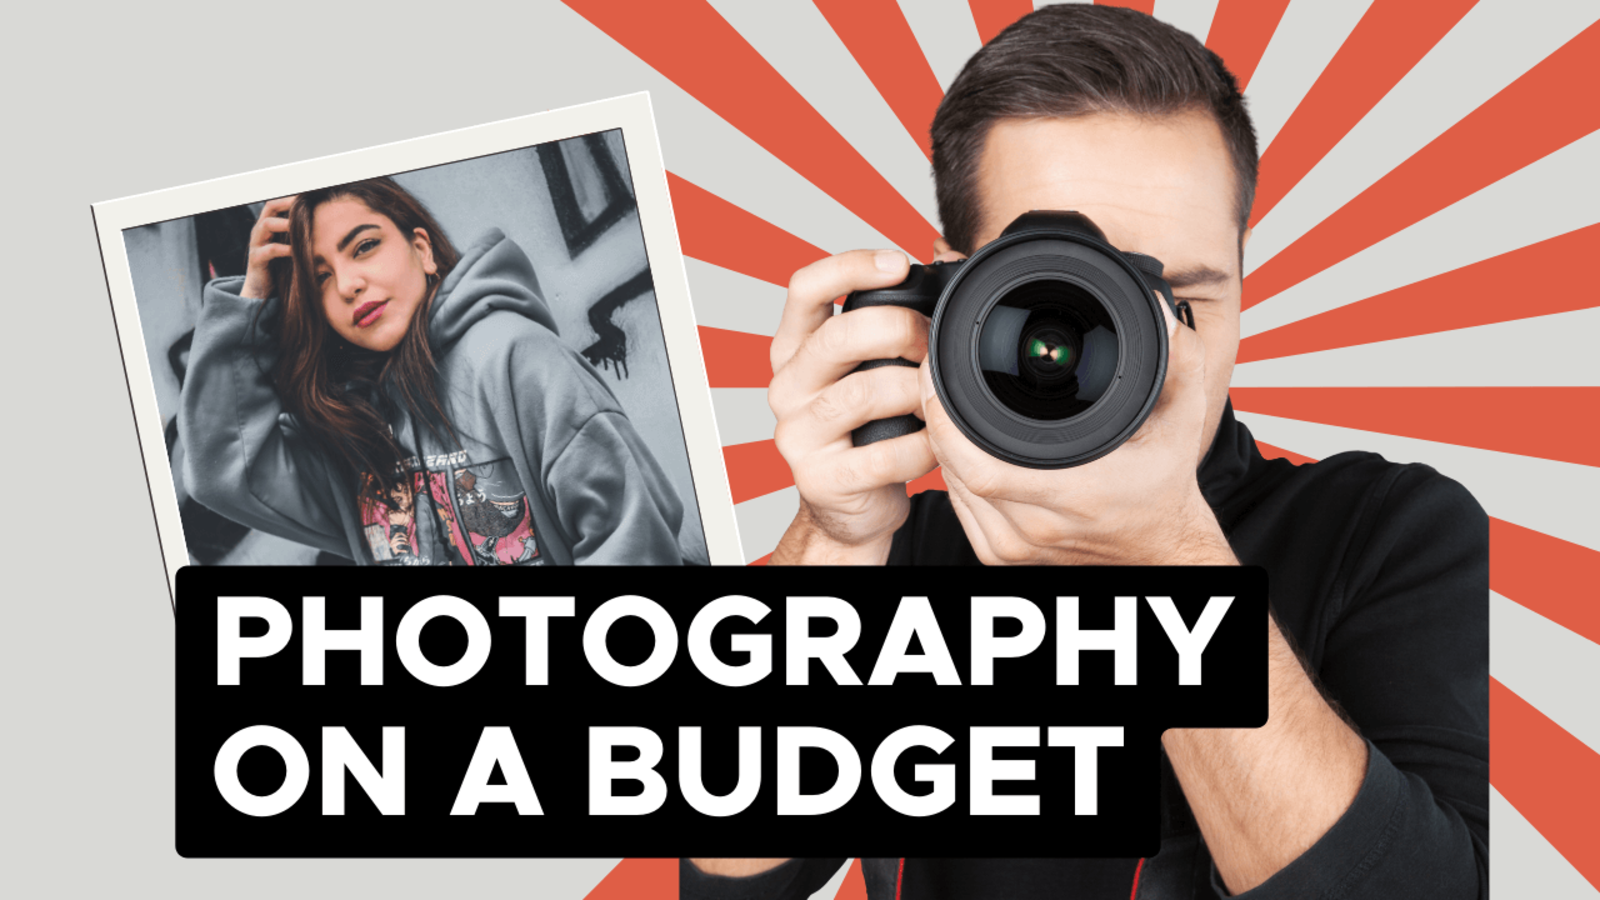 10 Tips for Product Photography on a Budget